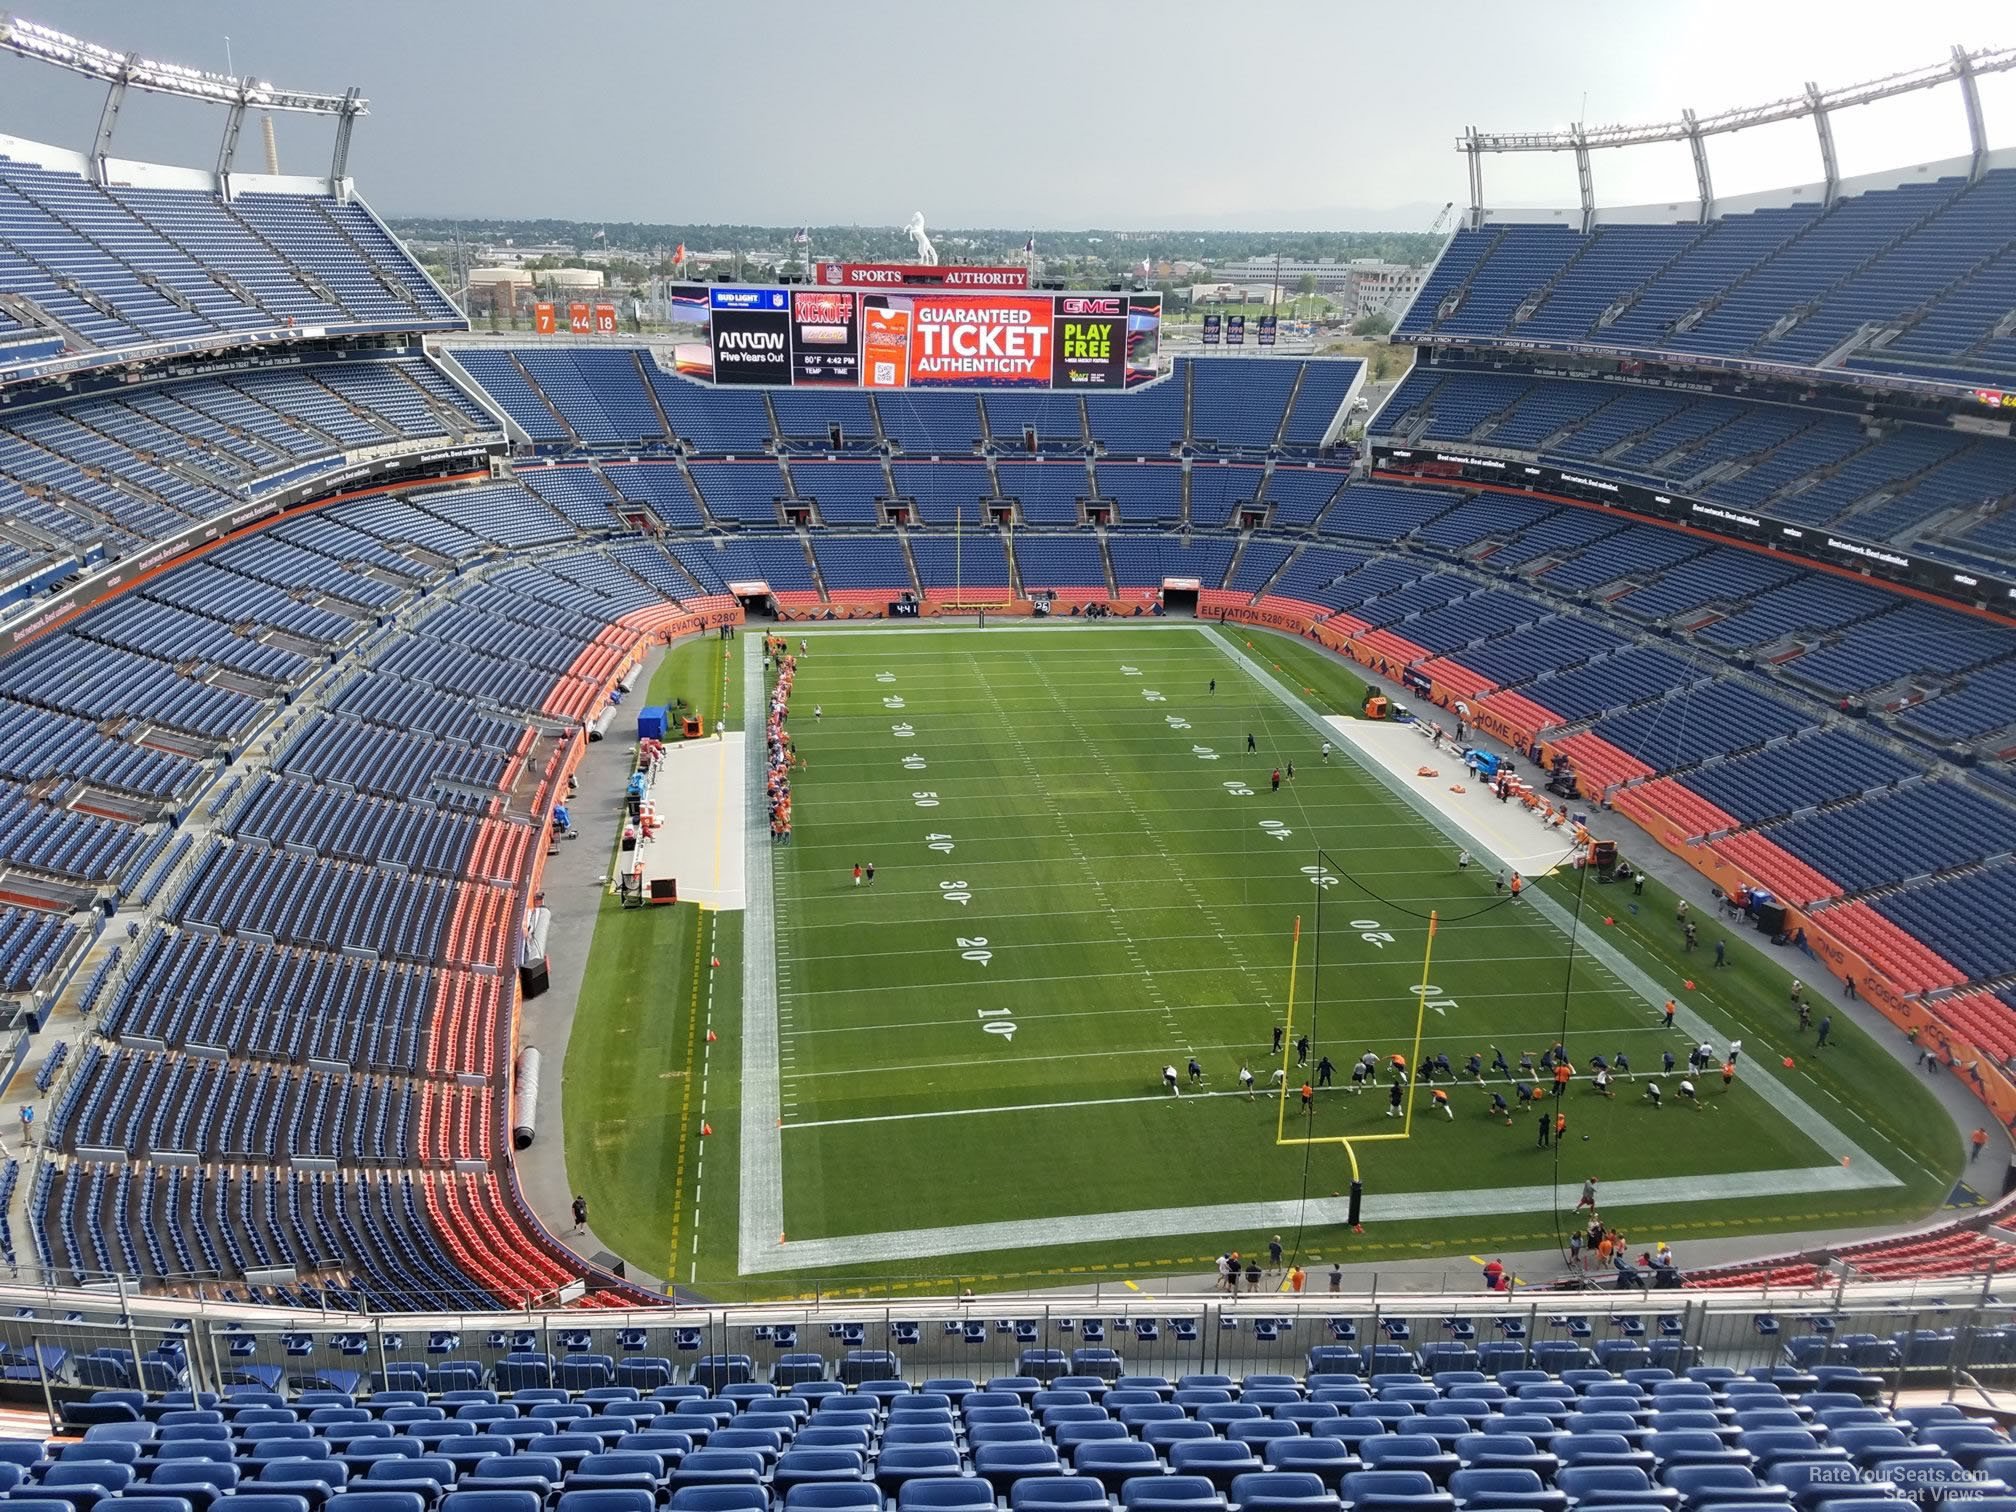 Mile High Stadium Seating Chart Rows